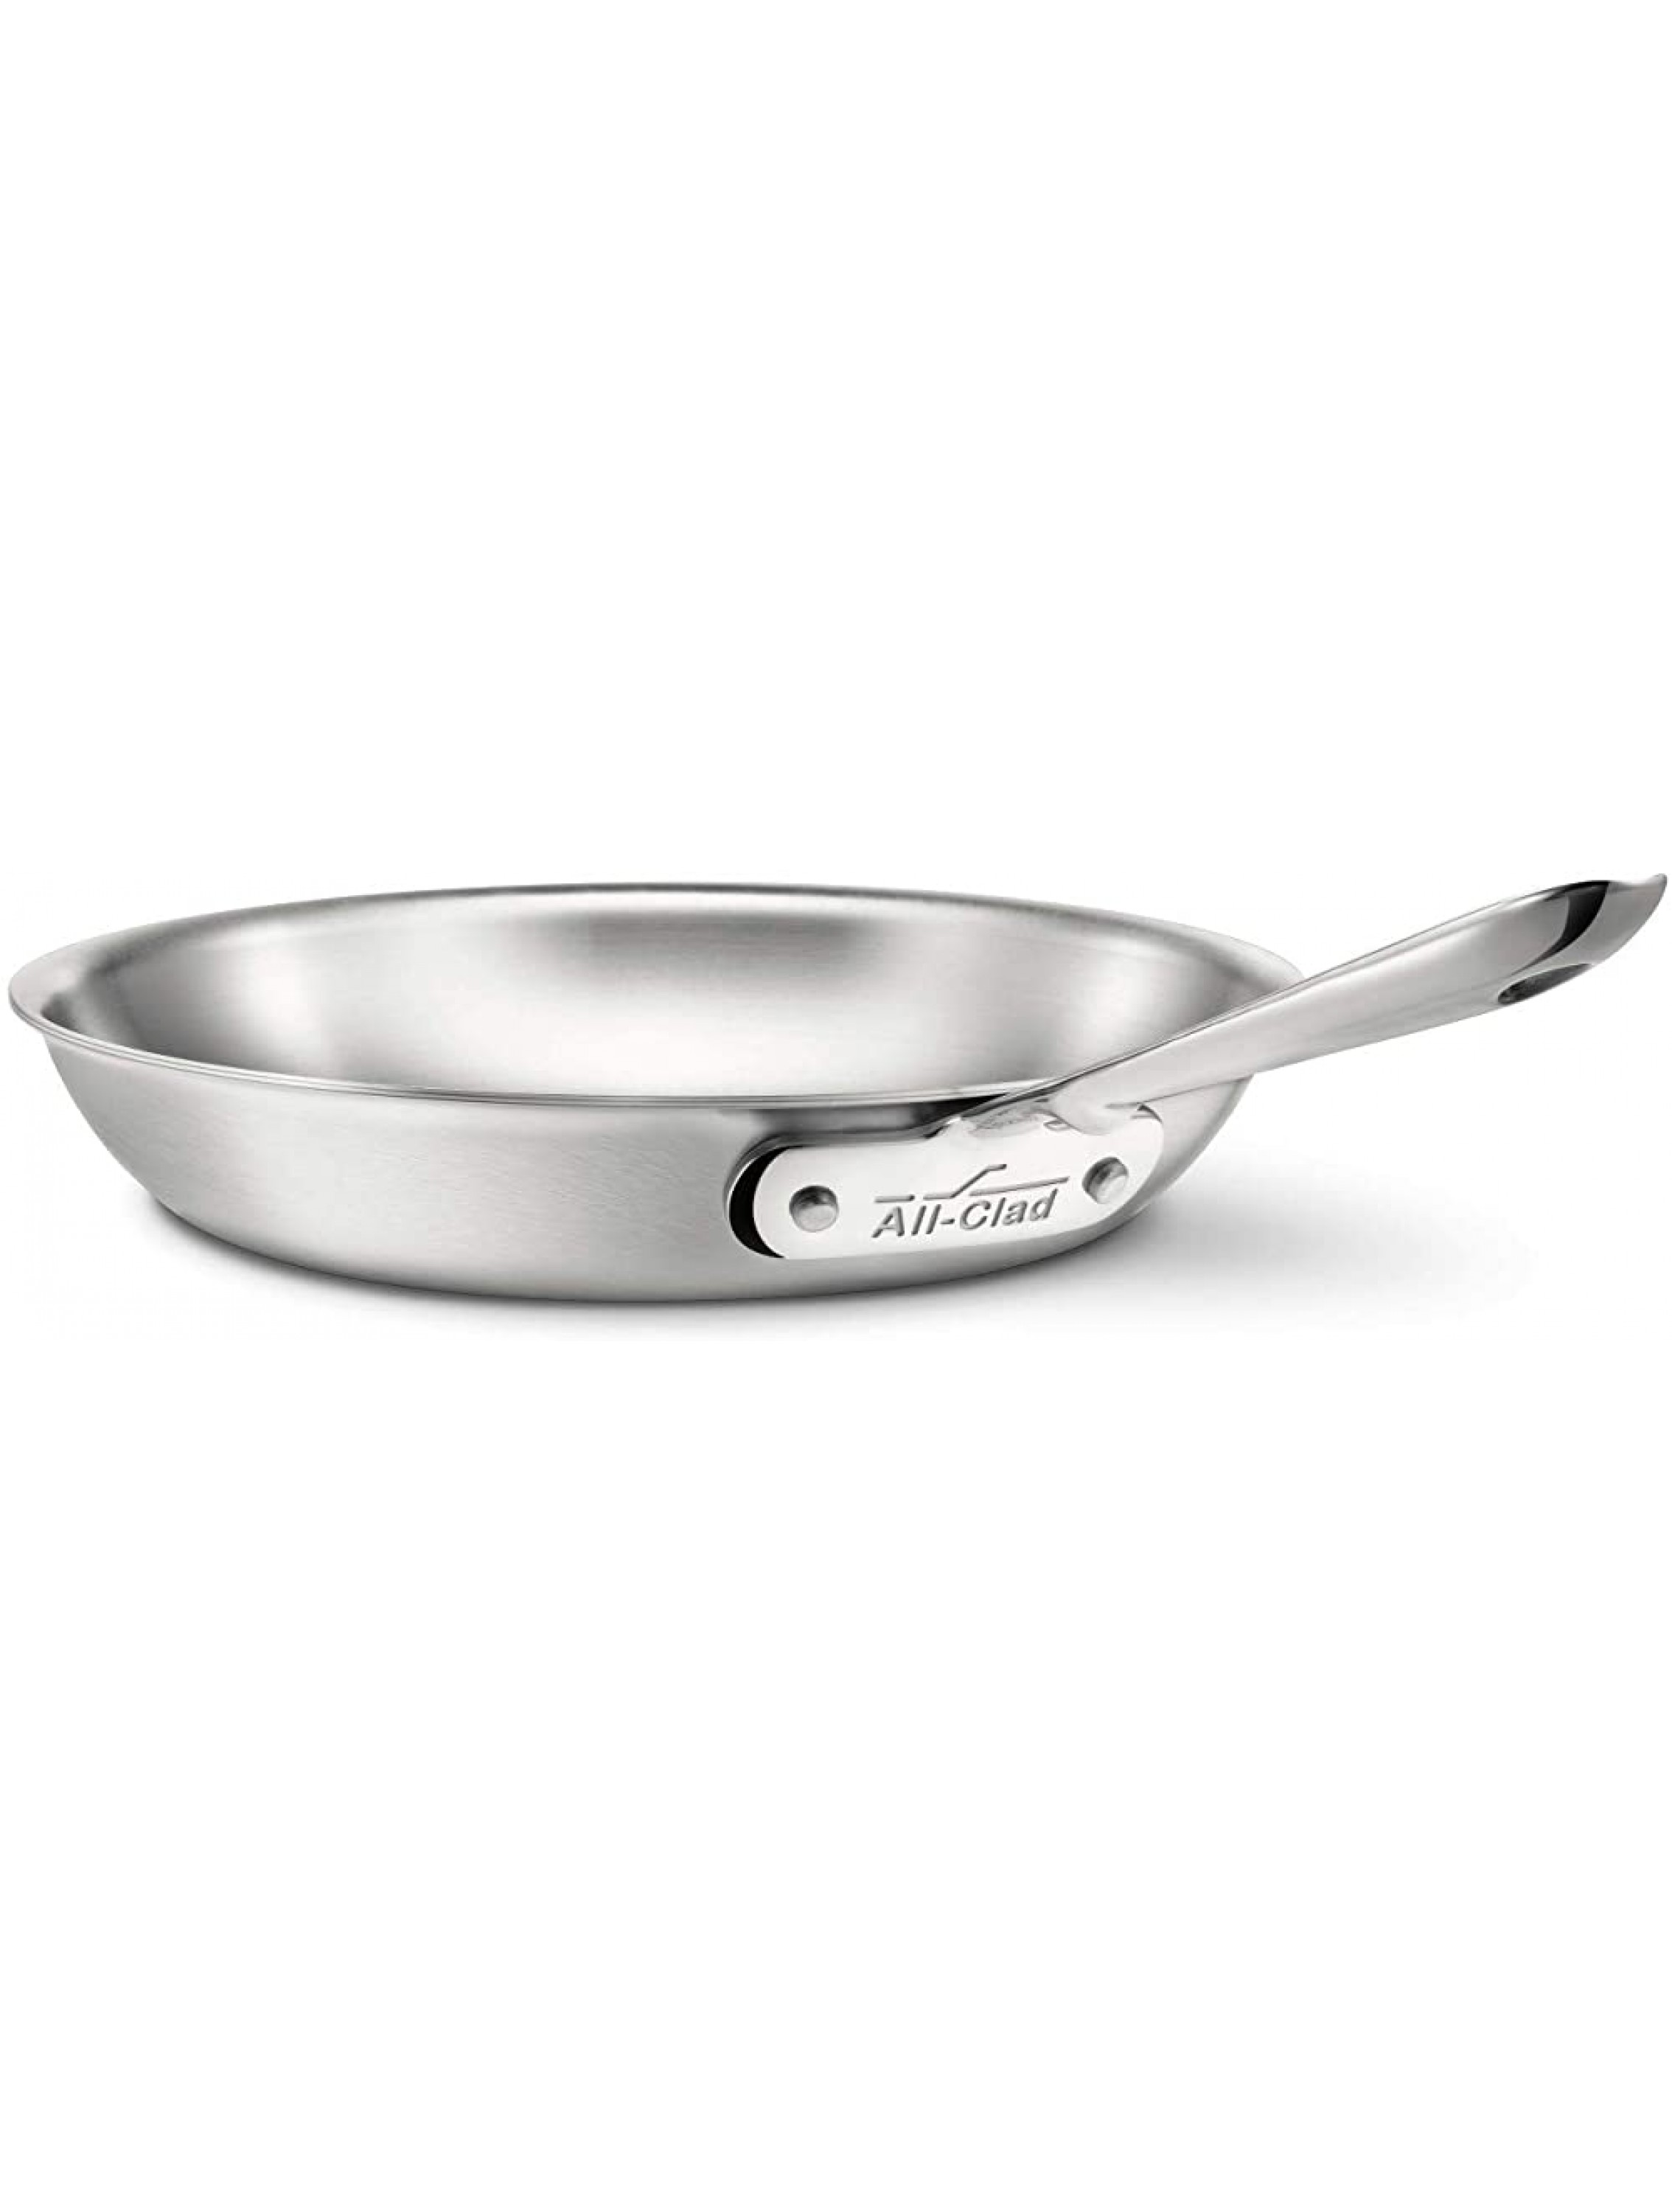 All-Clad BD55110 D5 Brushed 18 10 Stainless Steel 5-Ply Bonded Dishwasher Safe Fry Pan Saute Pan Cookware 10-Inch Silver - BZVI7UKOD